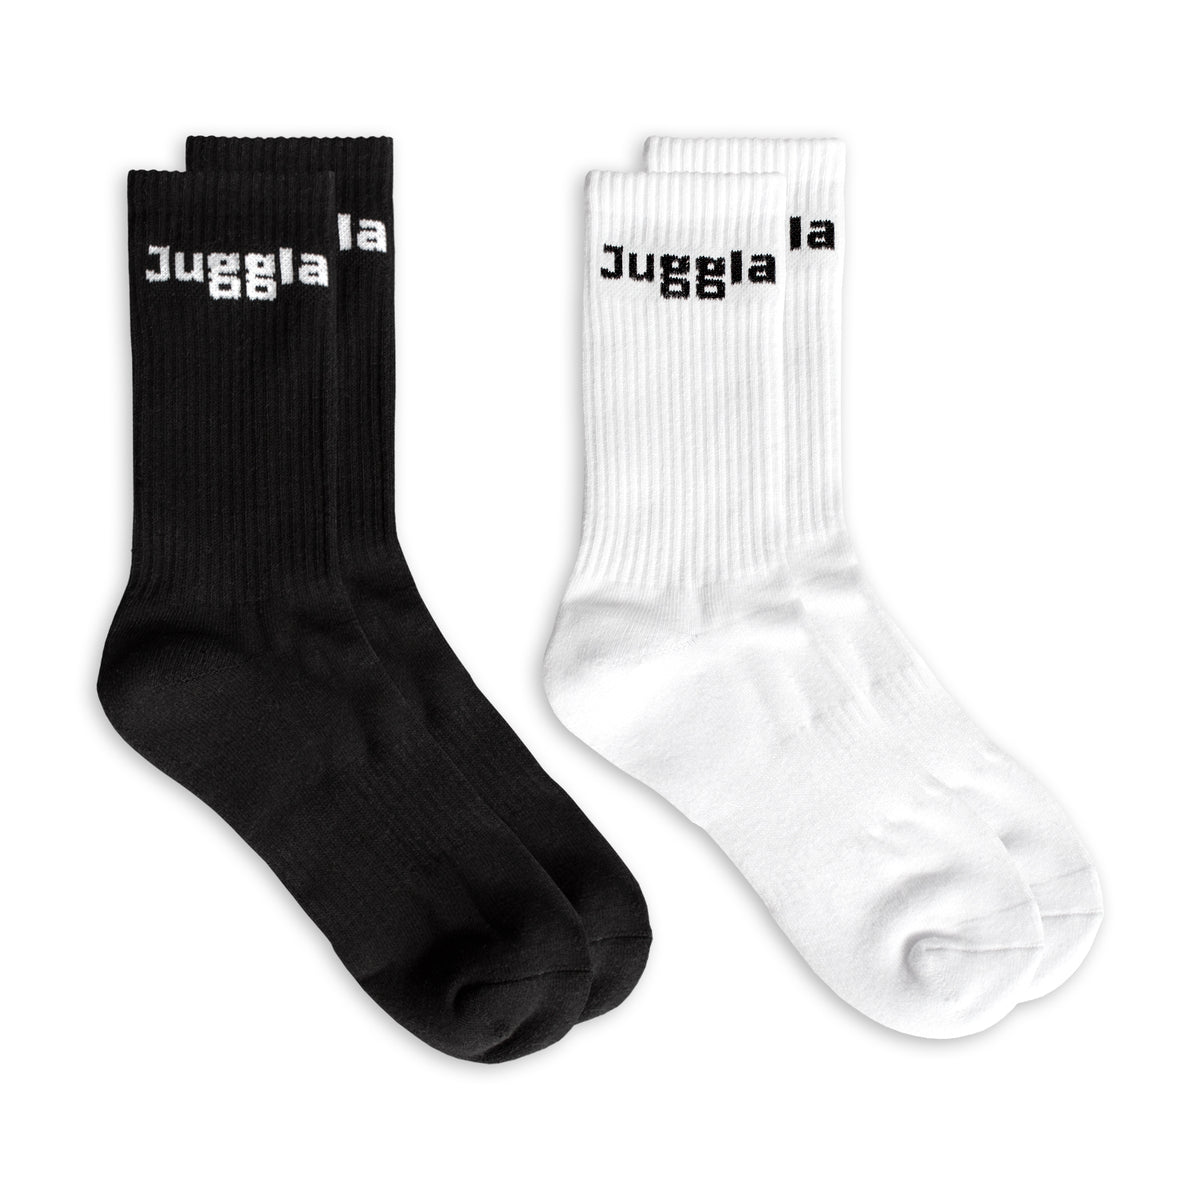 Flagship logo socks  young legacy collection